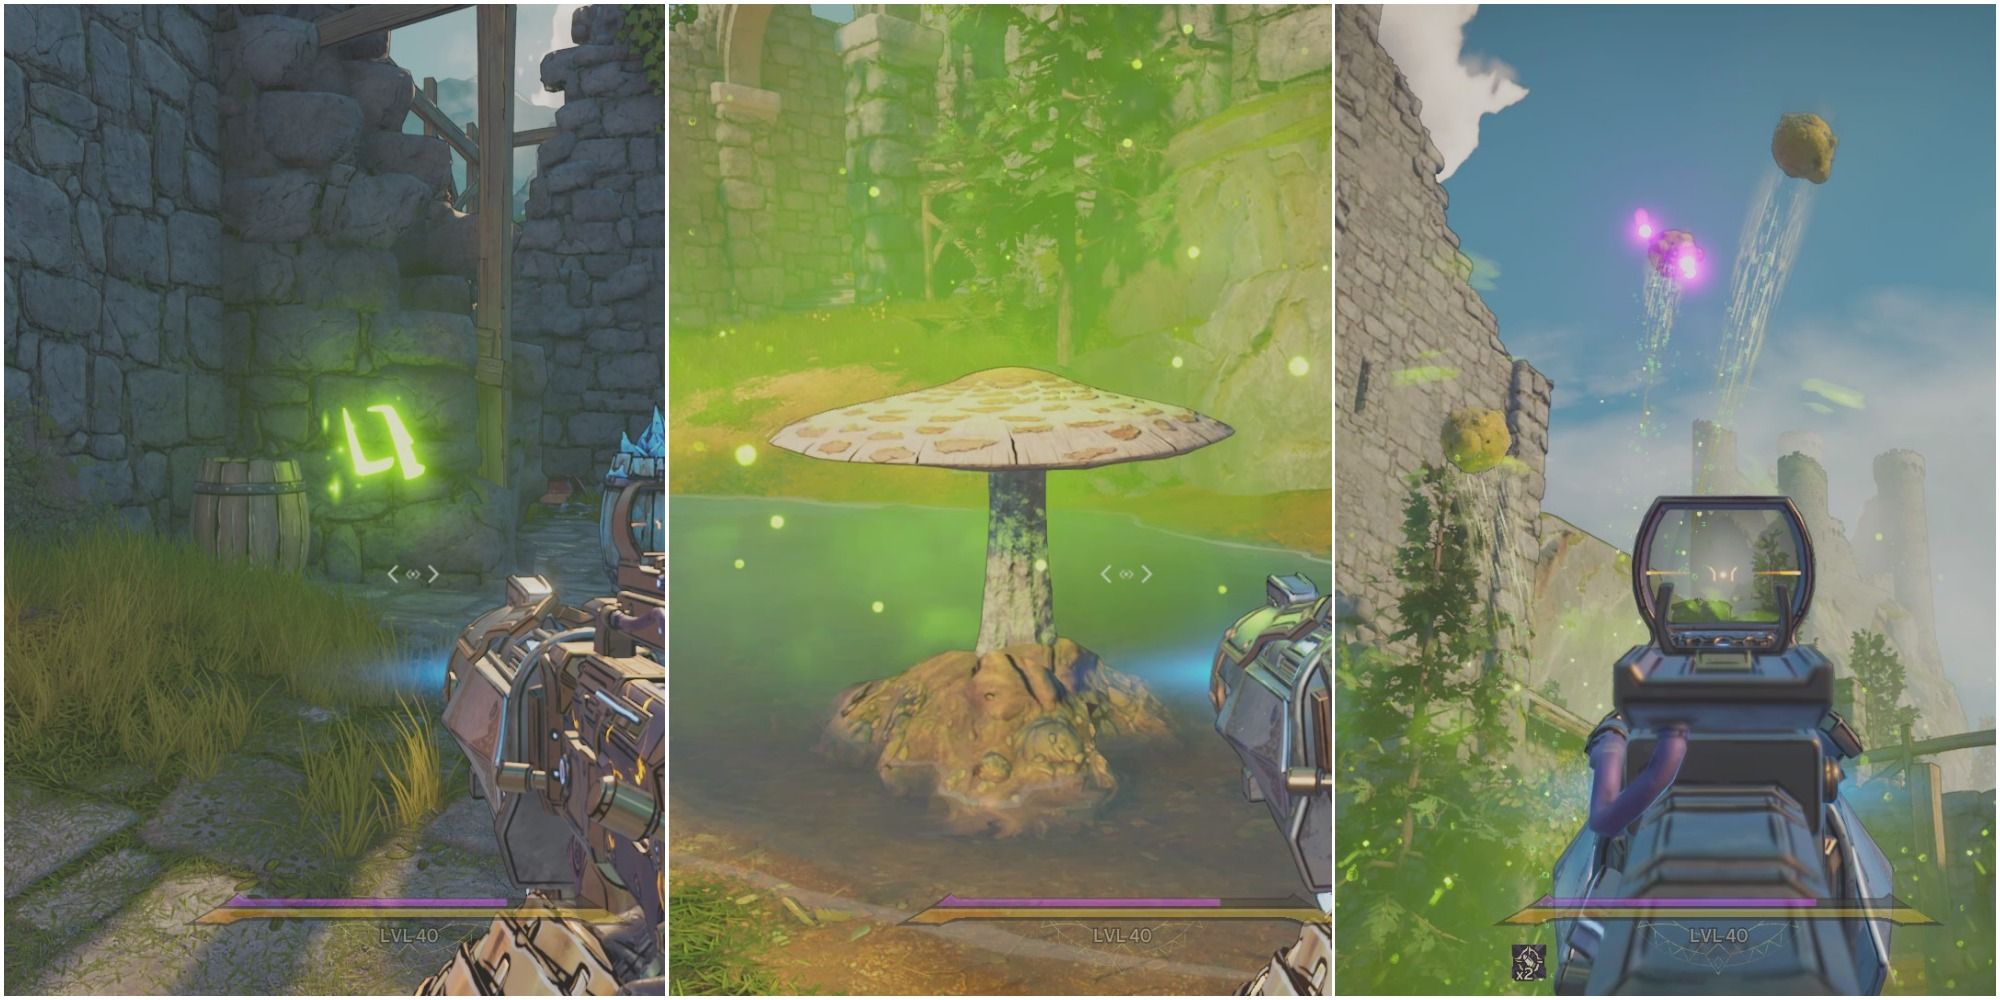 A split image of green sigil on crumbling stone wall, green glowing mushroom, and falling fungal spores with one glowing purple